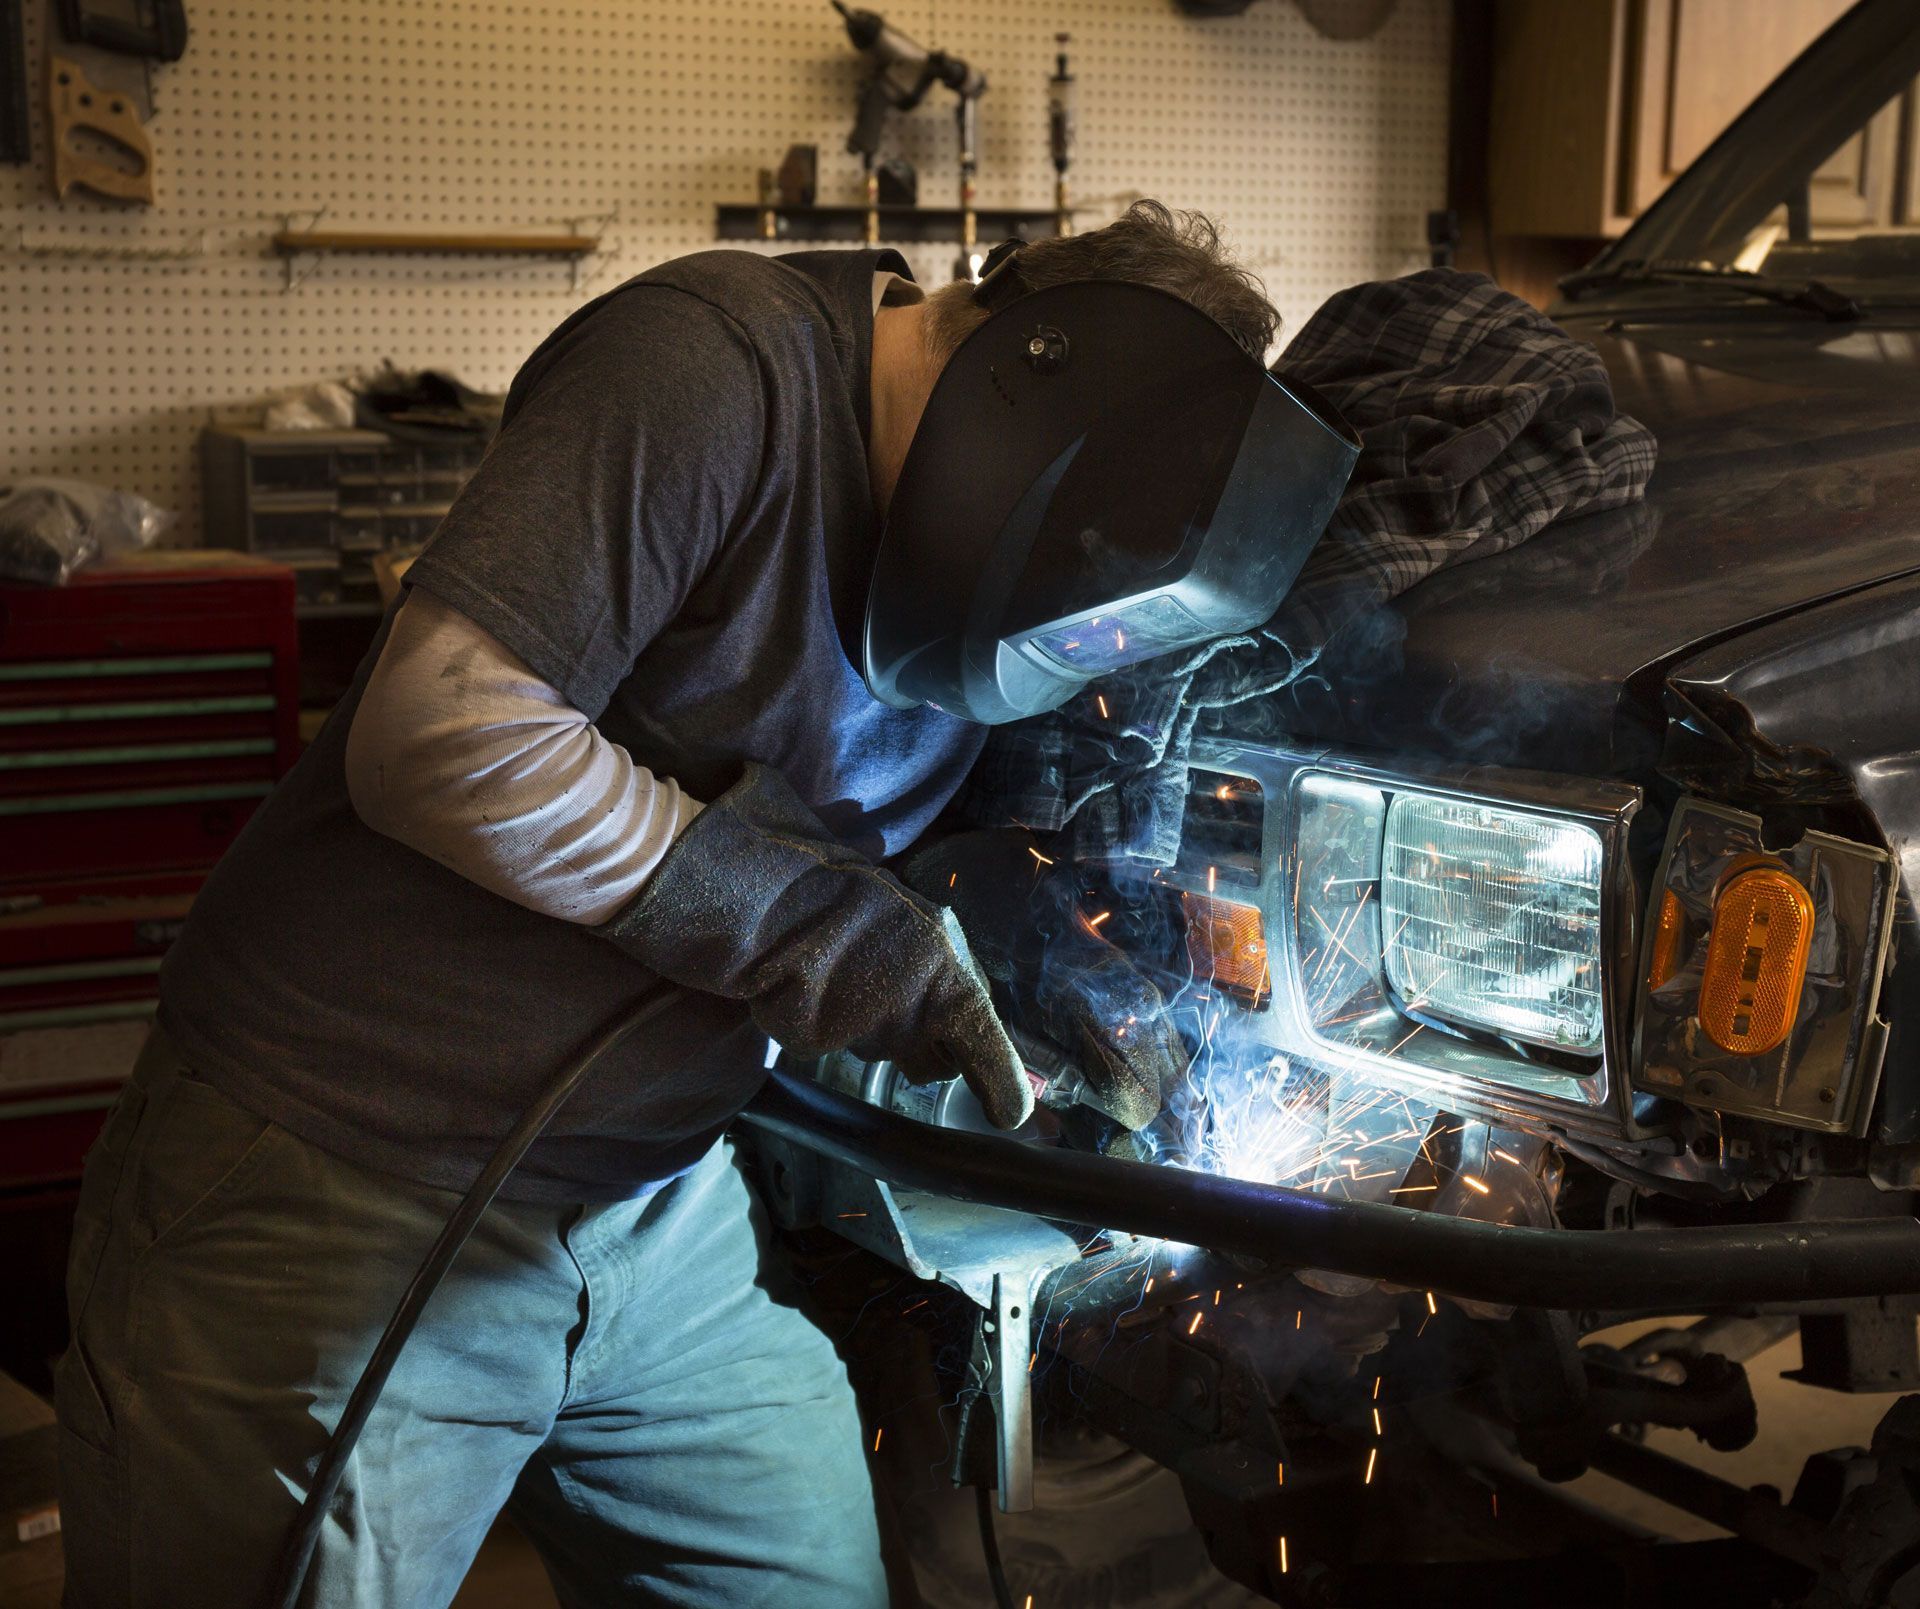 A man wearing a welding mask is working on a car